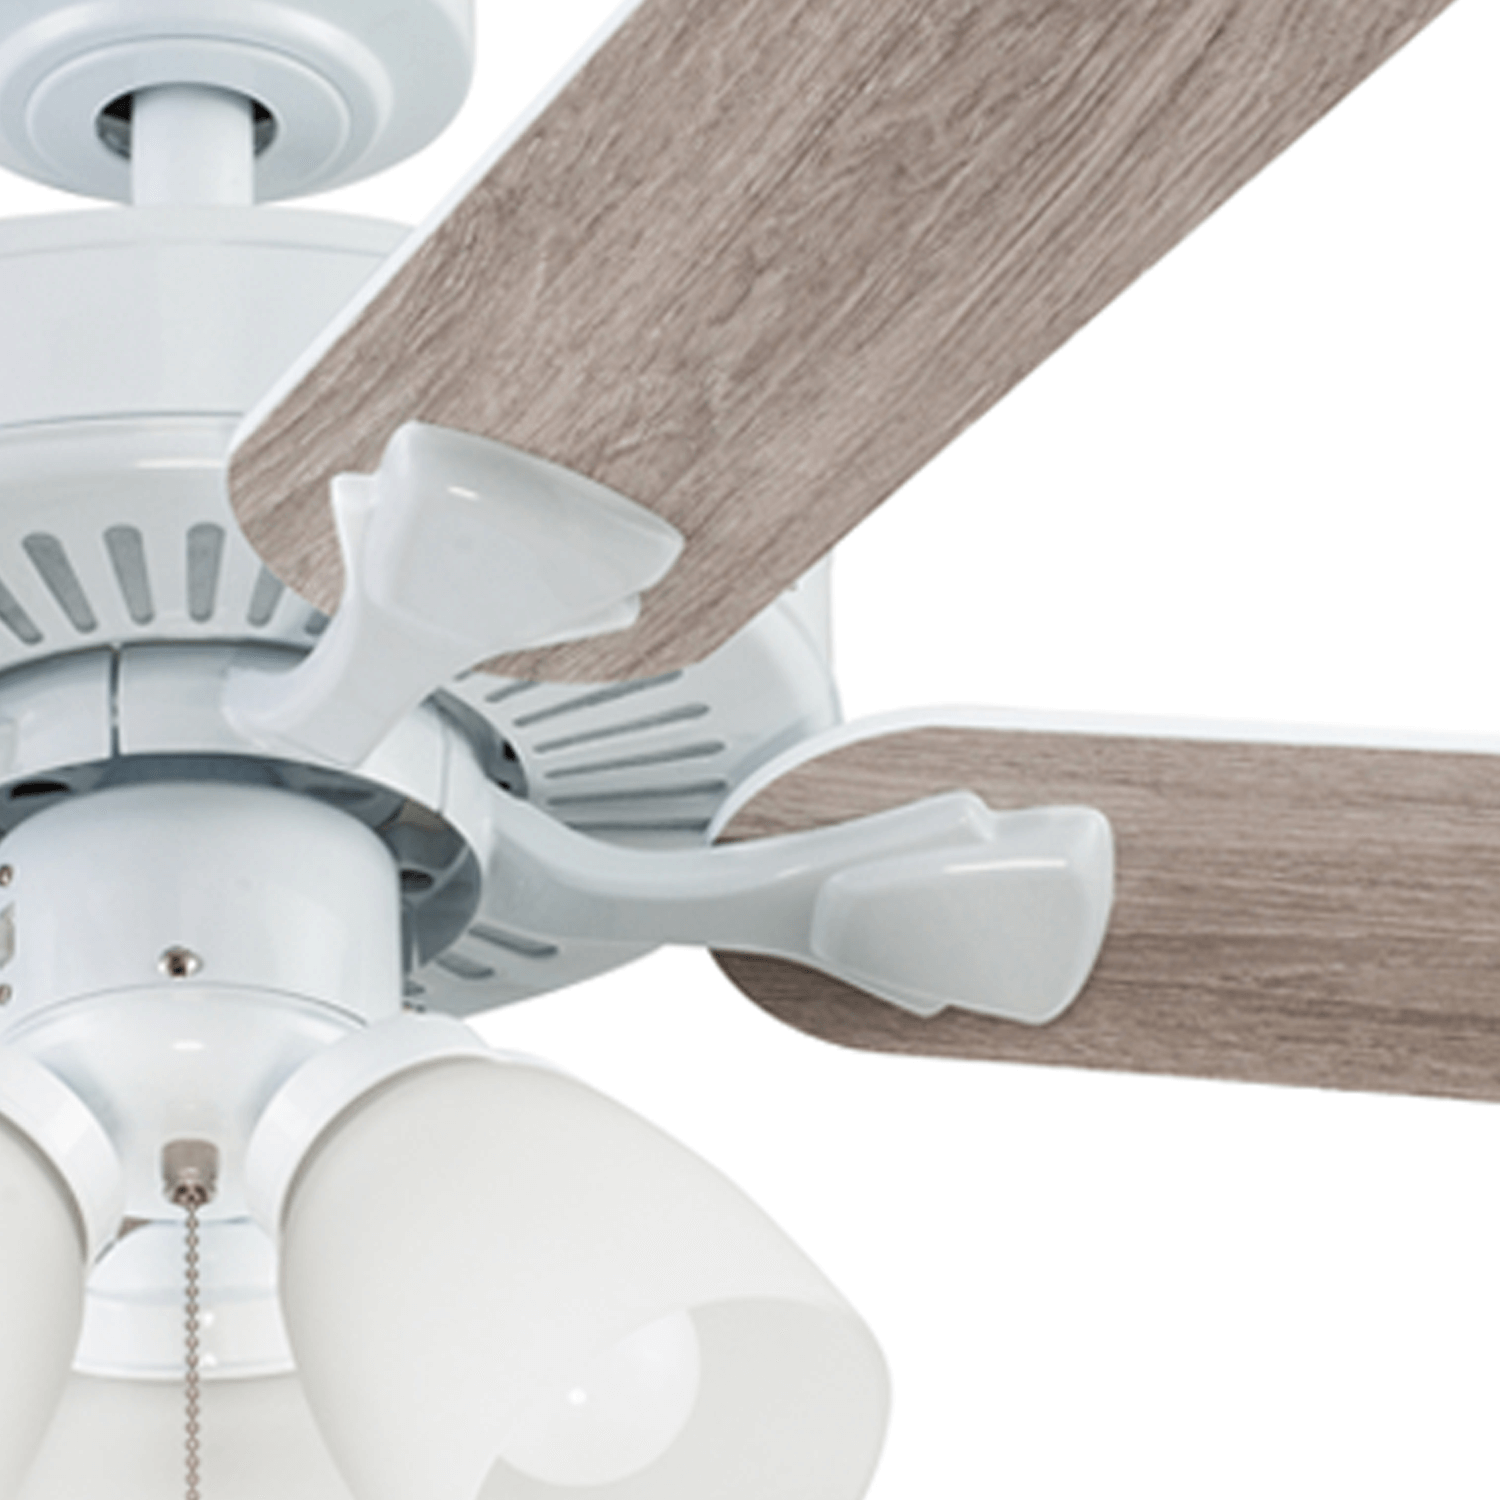 52 Inch Stannor, White, Pull Chain, Ceiling Fan by Prominence Home